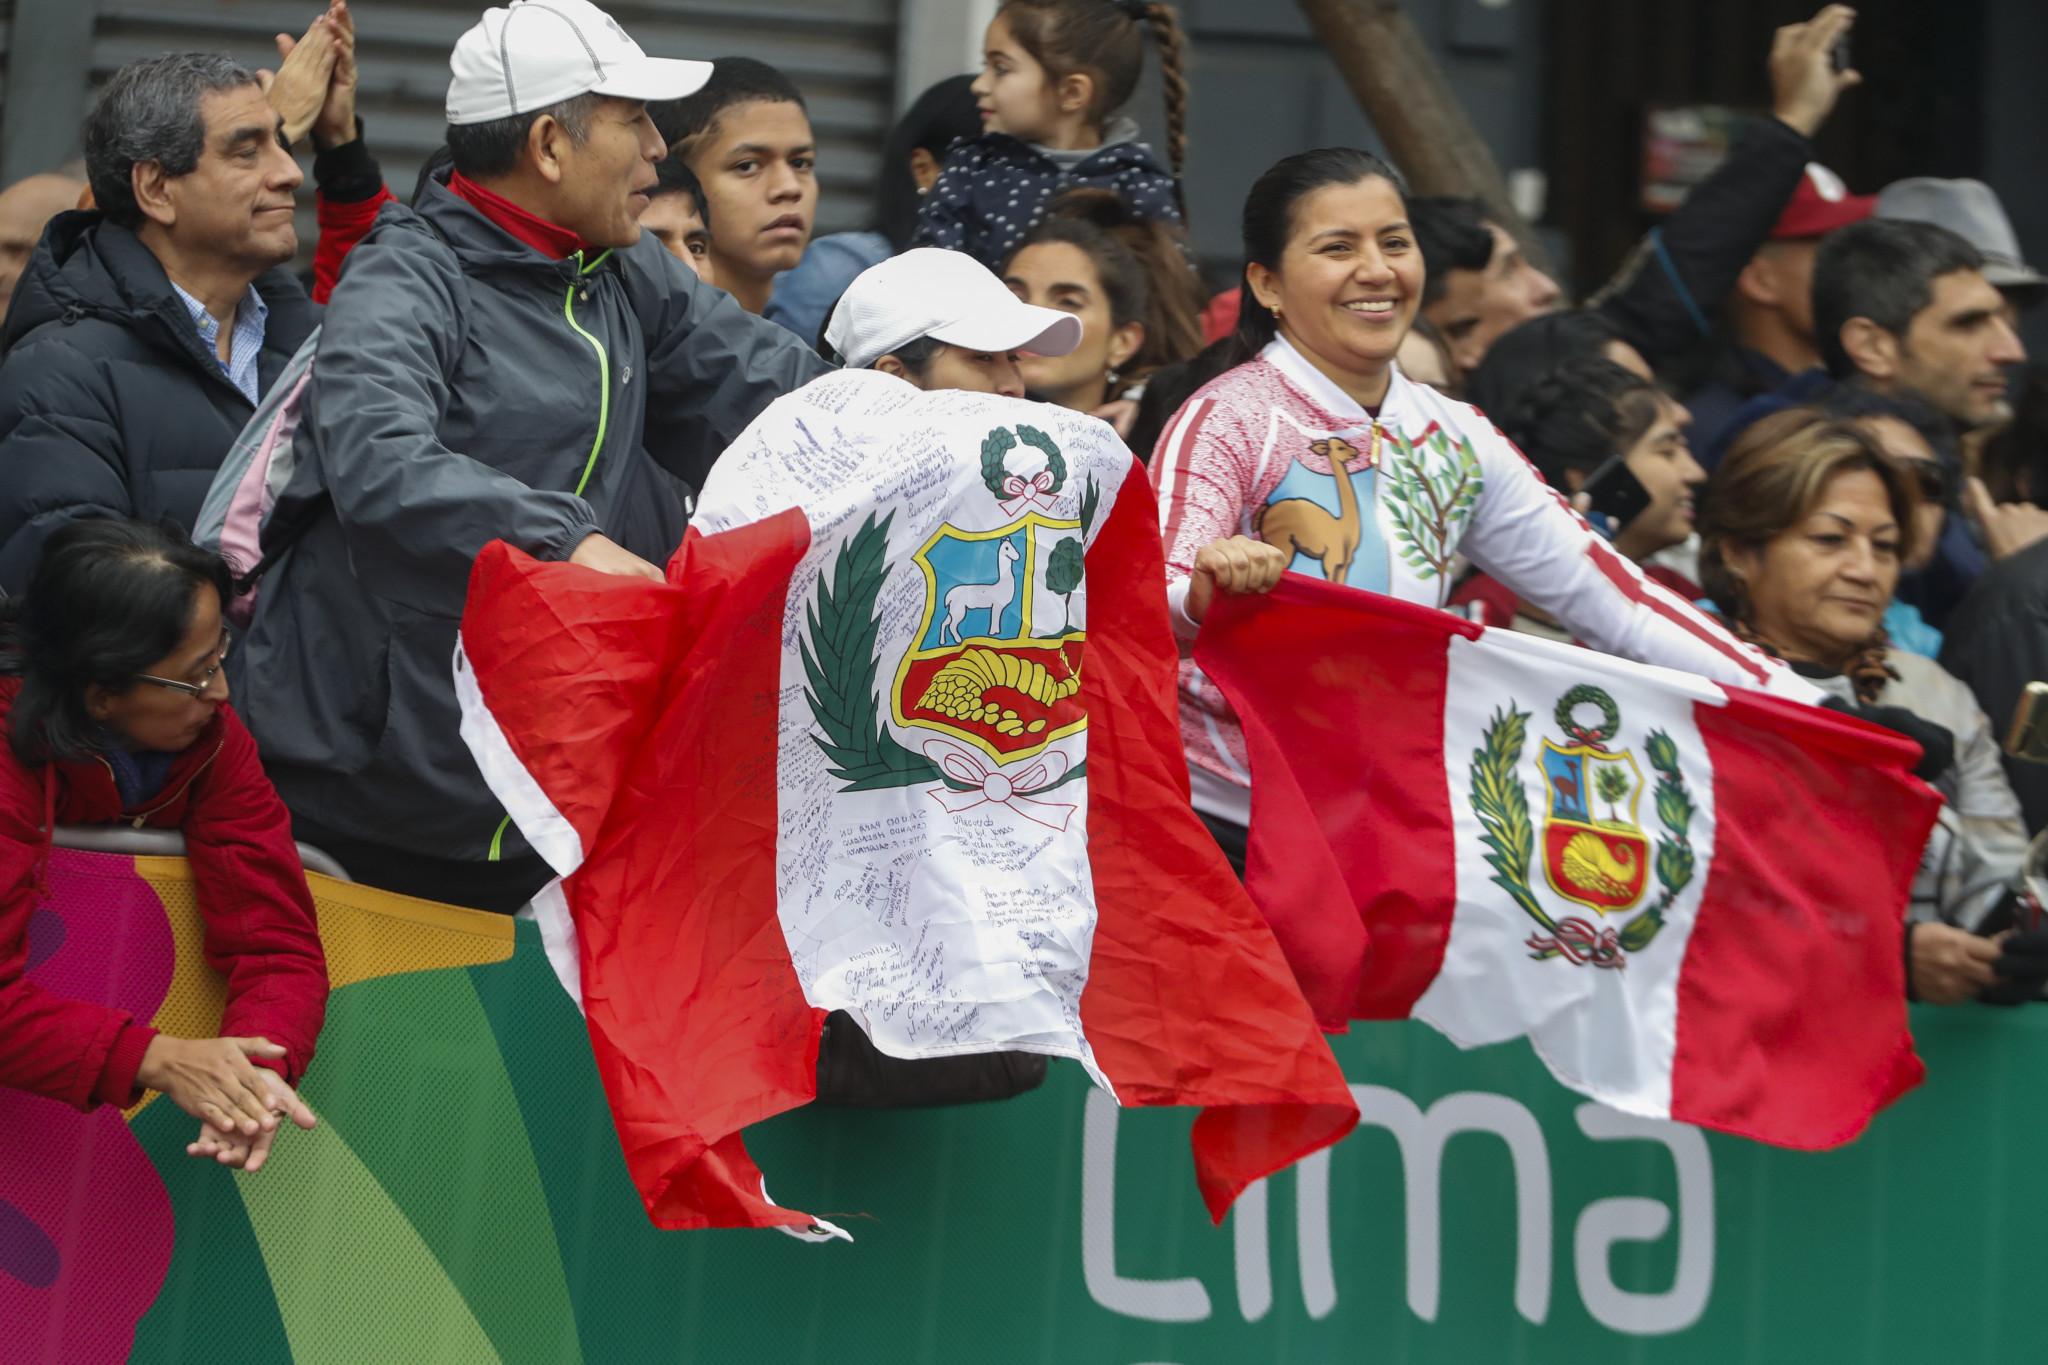 Peruvian crowds lined the streets for the Lima 2019 Pan American Games marathon ©Lima 2019